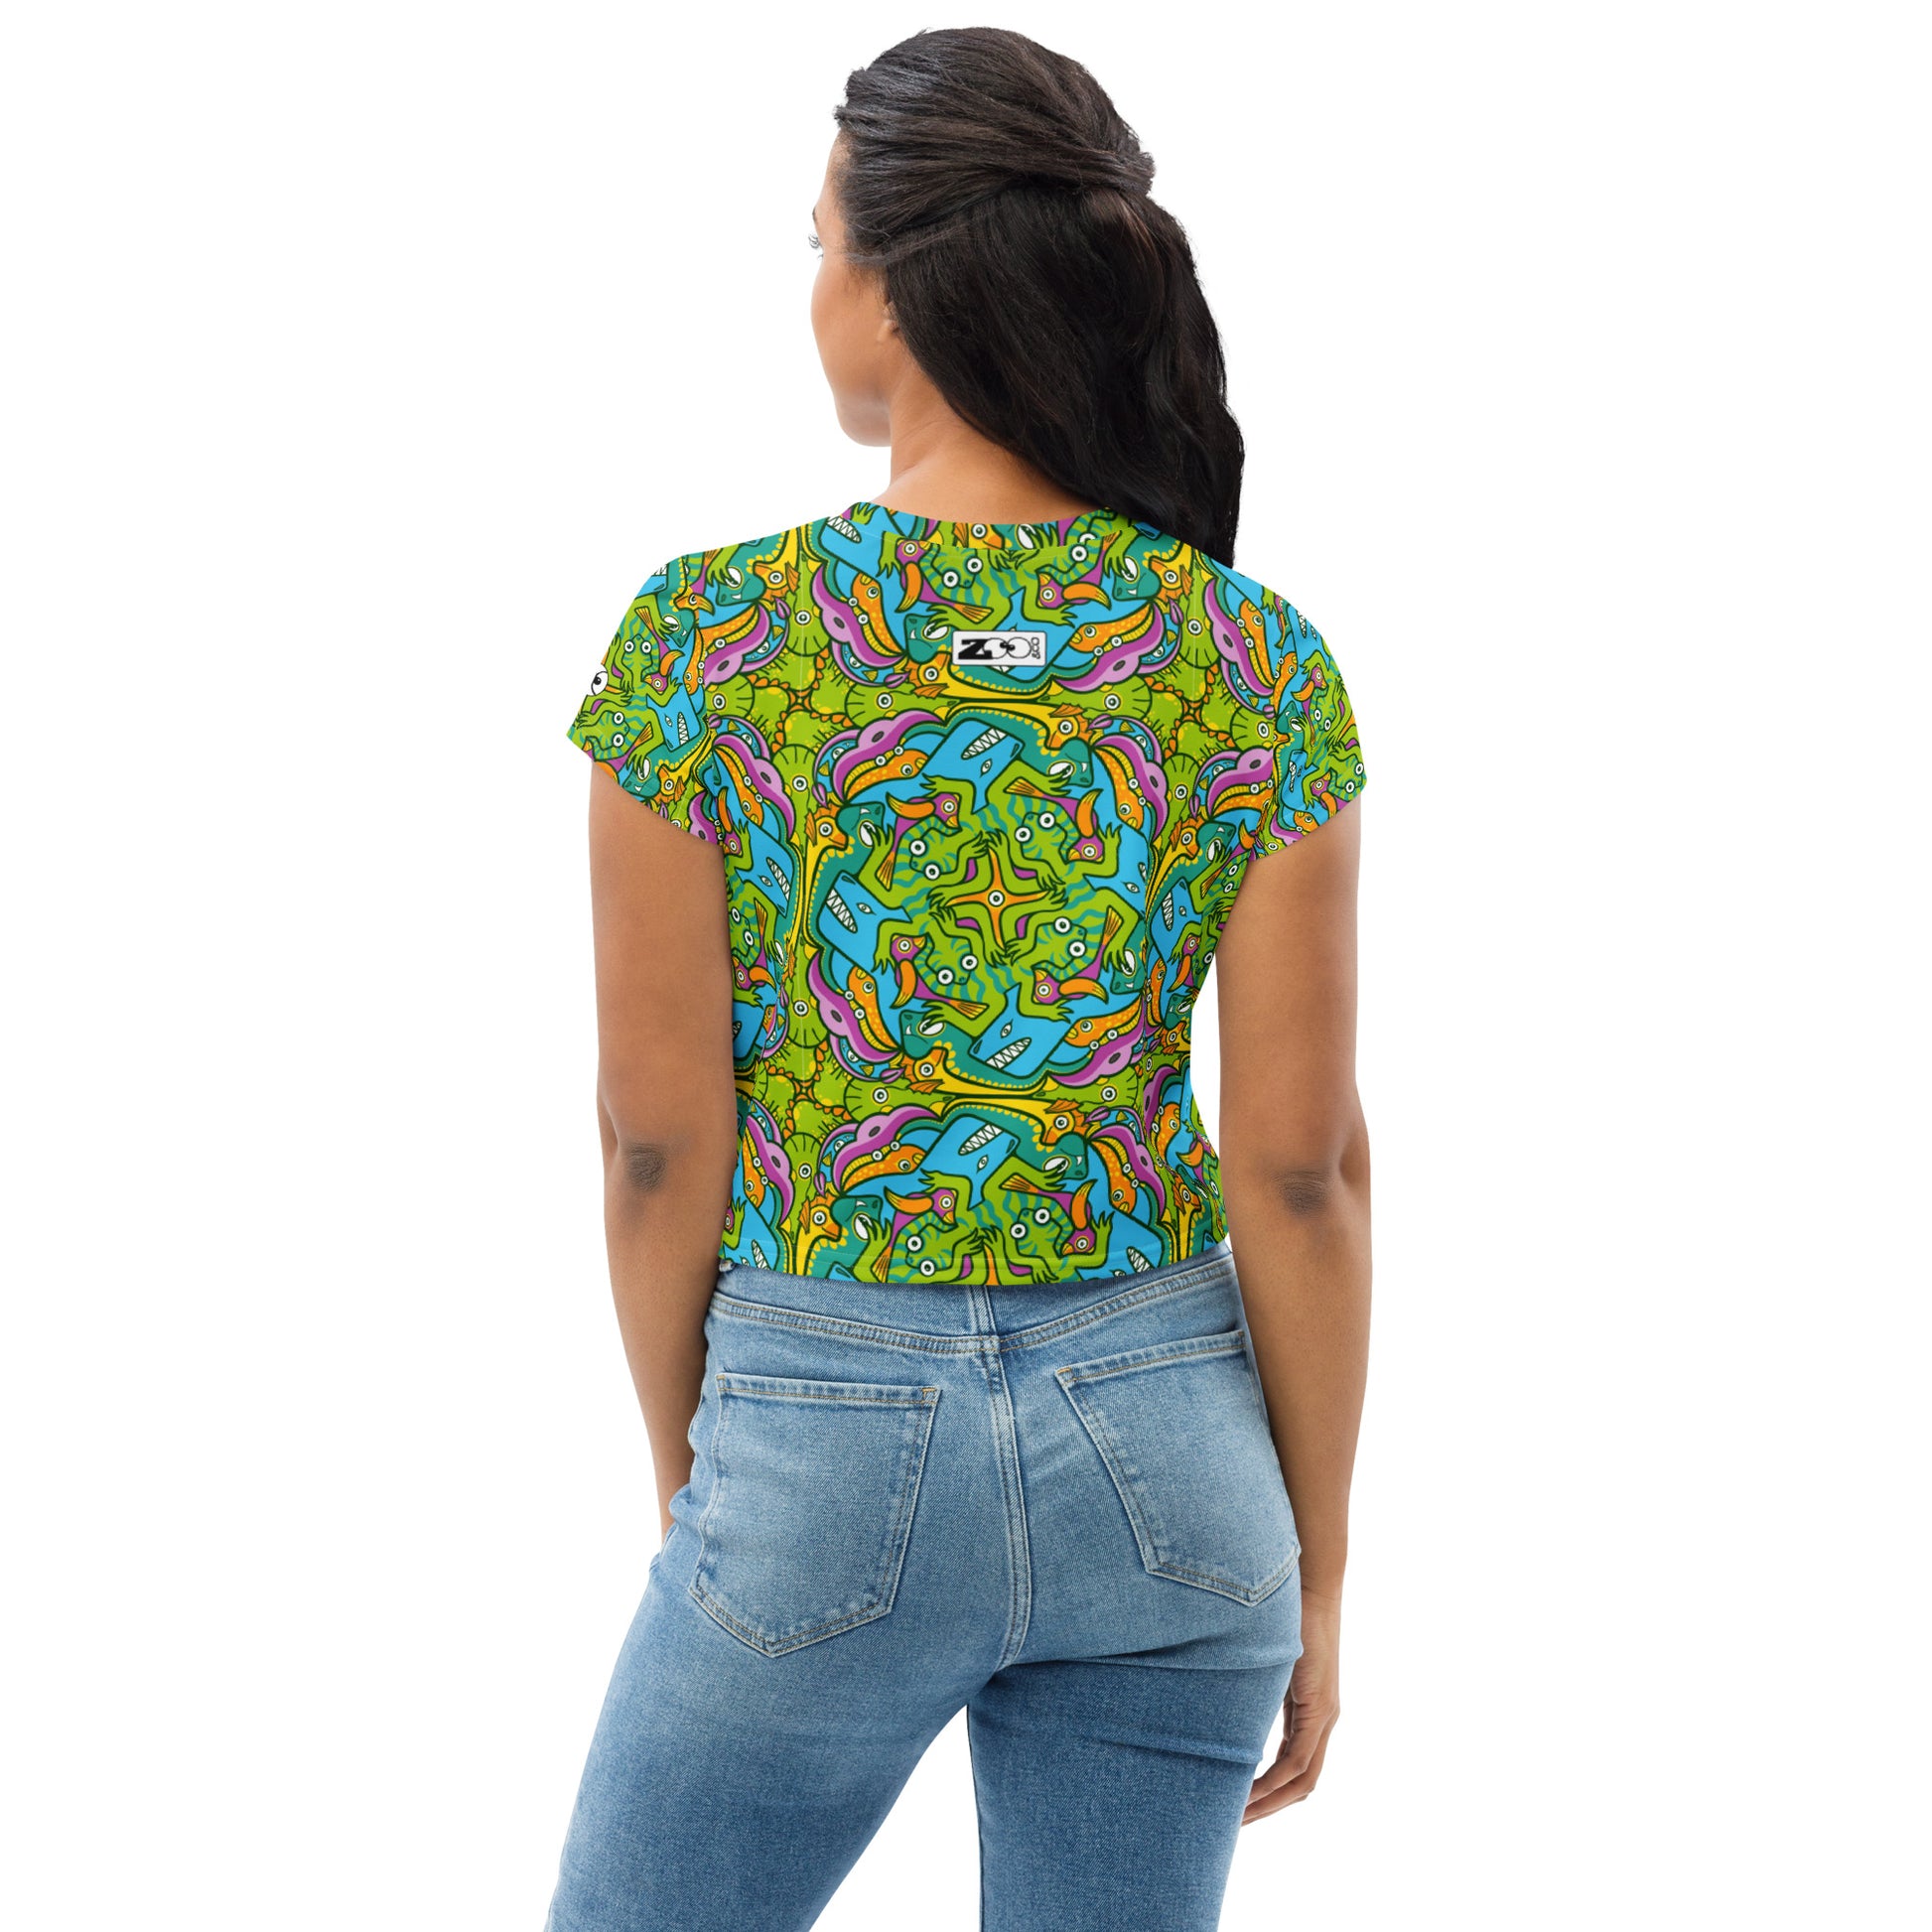 To keep calm and doodle is more than just doodling All-Over Print Crop Tee. Back view